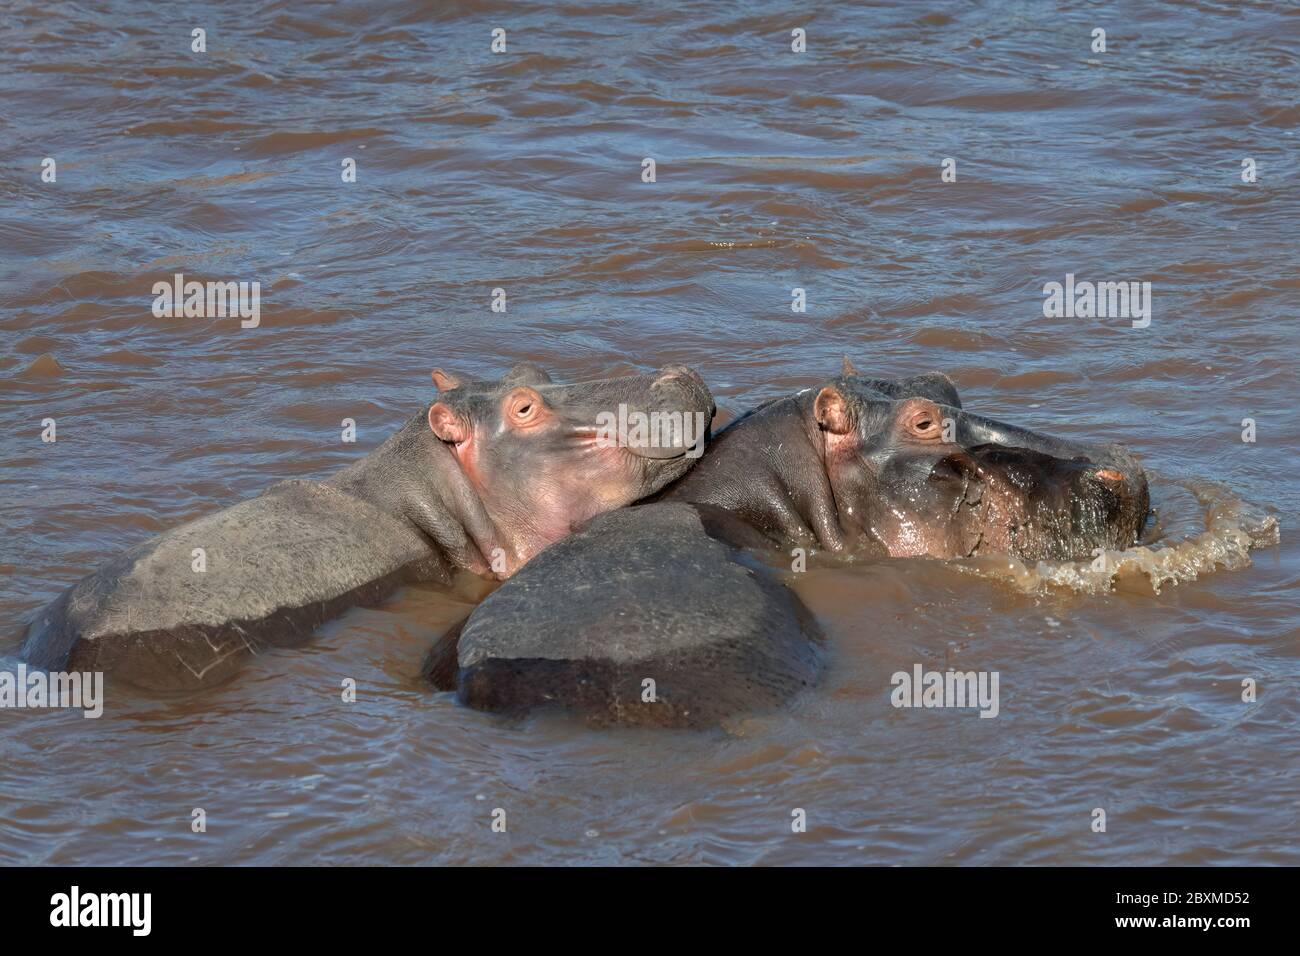 Baby hippo resting its head on its mother's back. Image taken in the Masai Mara, Kenya. Stock Photo